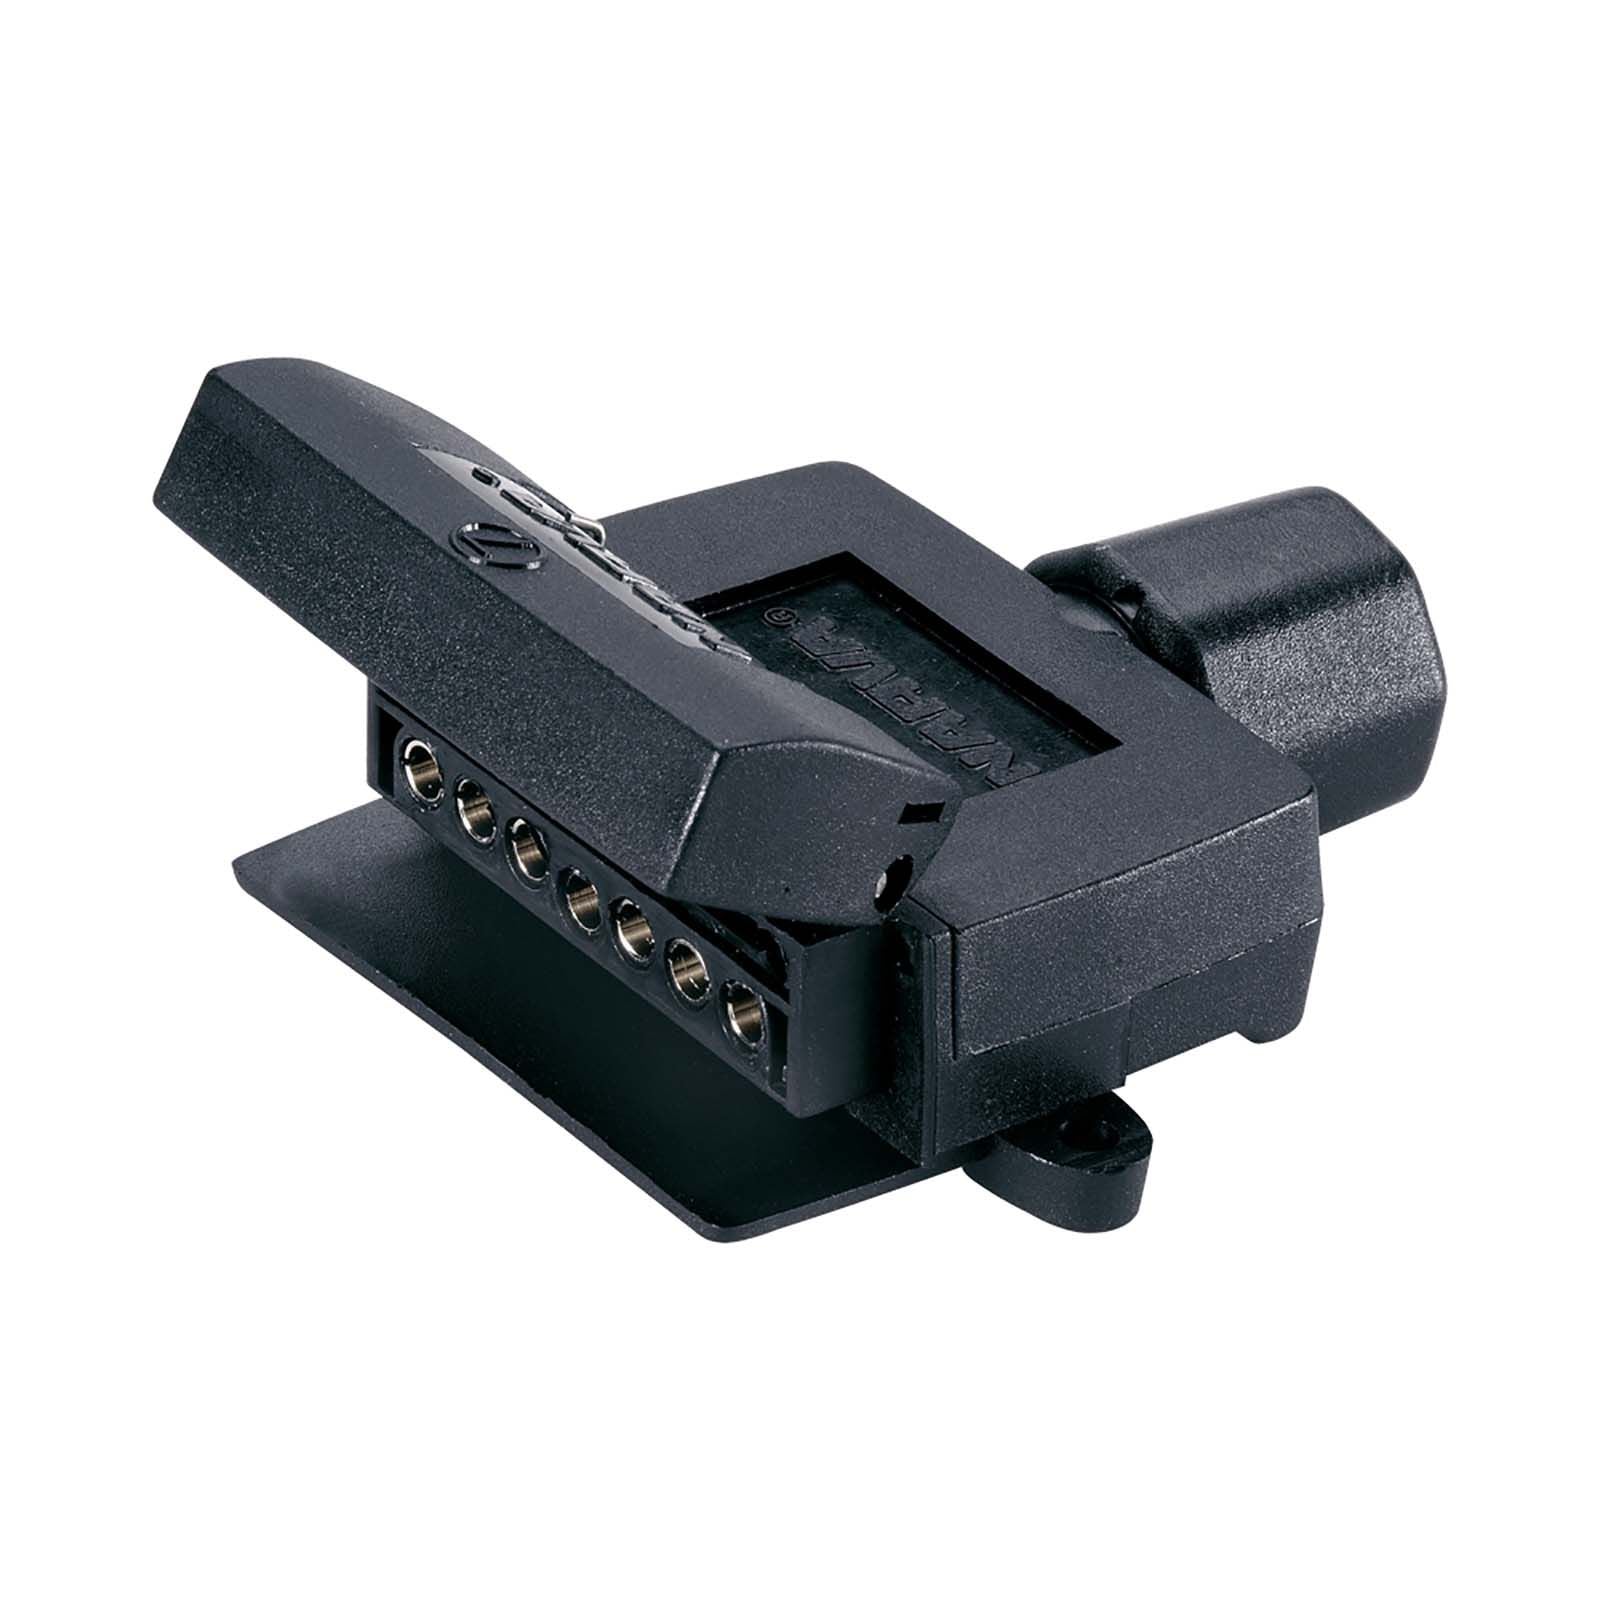 7 PIN FLAT 'Quickfit' TRAILER SOCKET WITH REED SWITCH FOR USE WITH NORMALLY CLOSED CIRCUITS